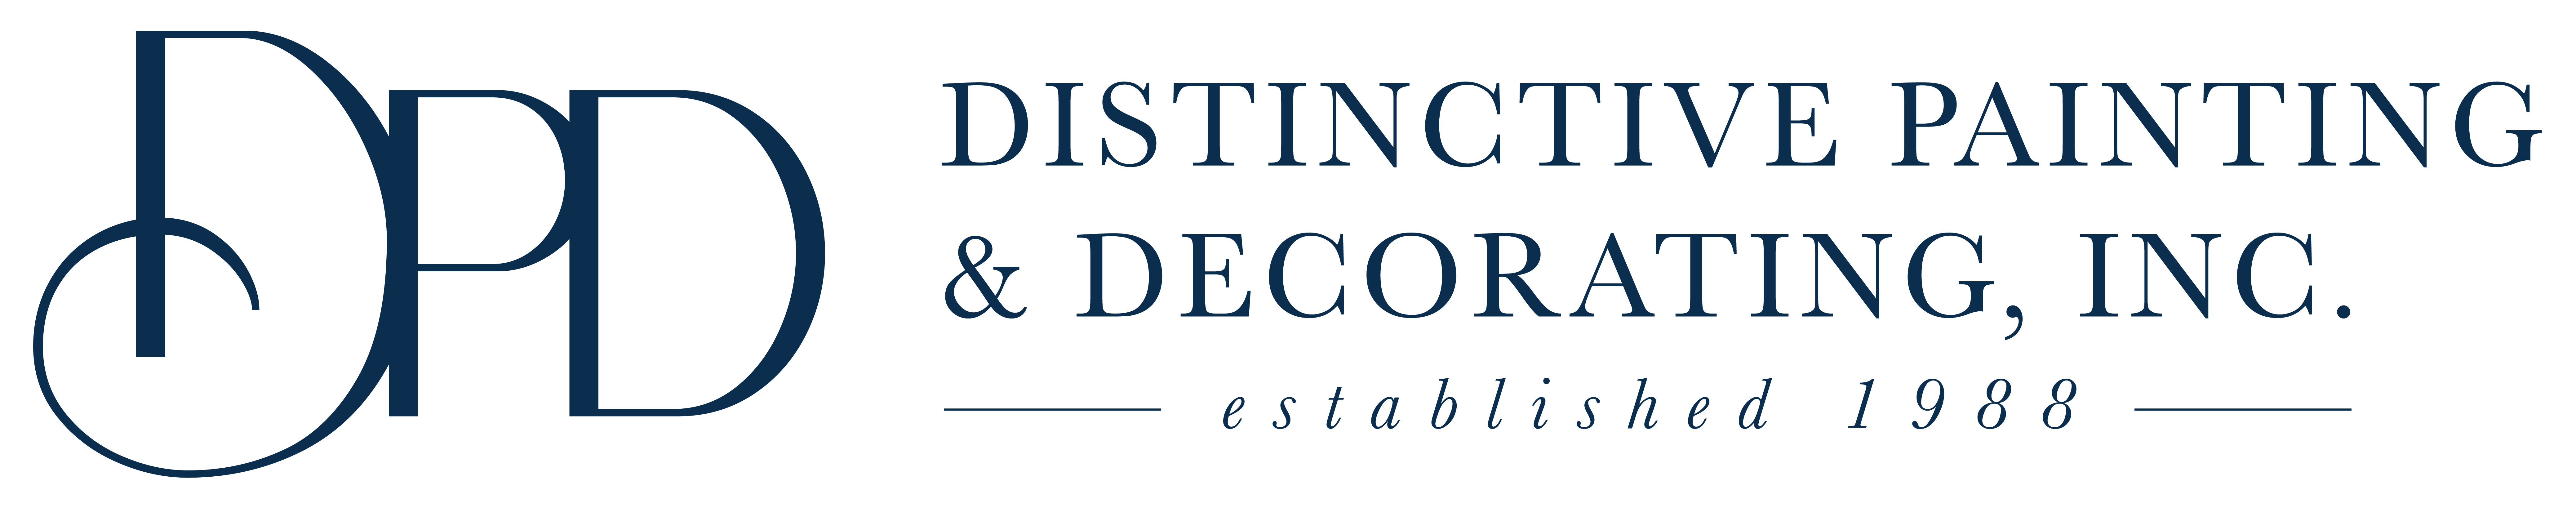 Distinctive Painting and Decorating, Inc.